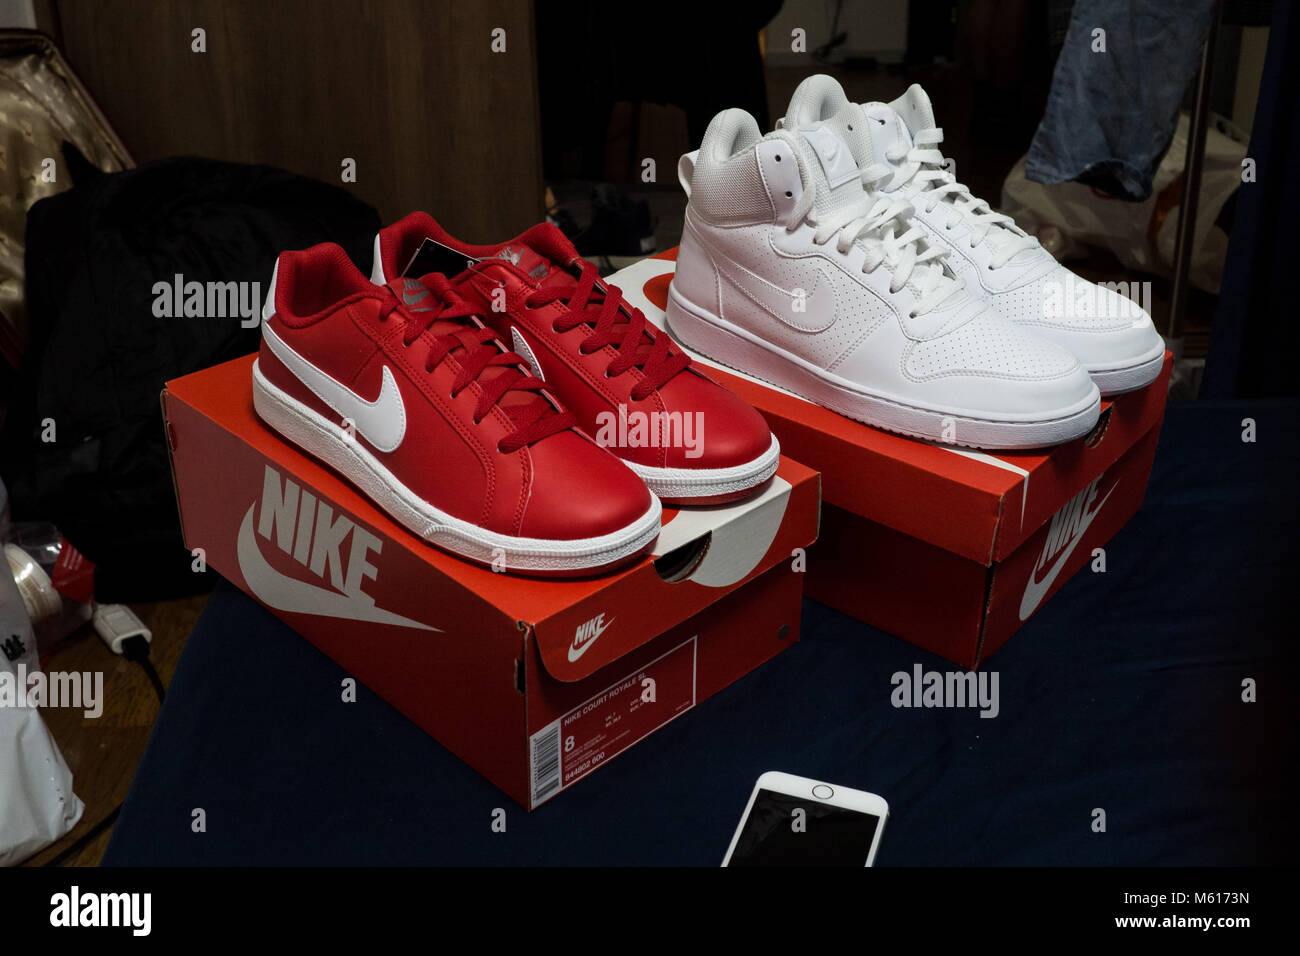 brand new Nike shoes fresh out of the box. Red Nike Walkers, White Nike Hi  Tops Stock Photo - Alamy